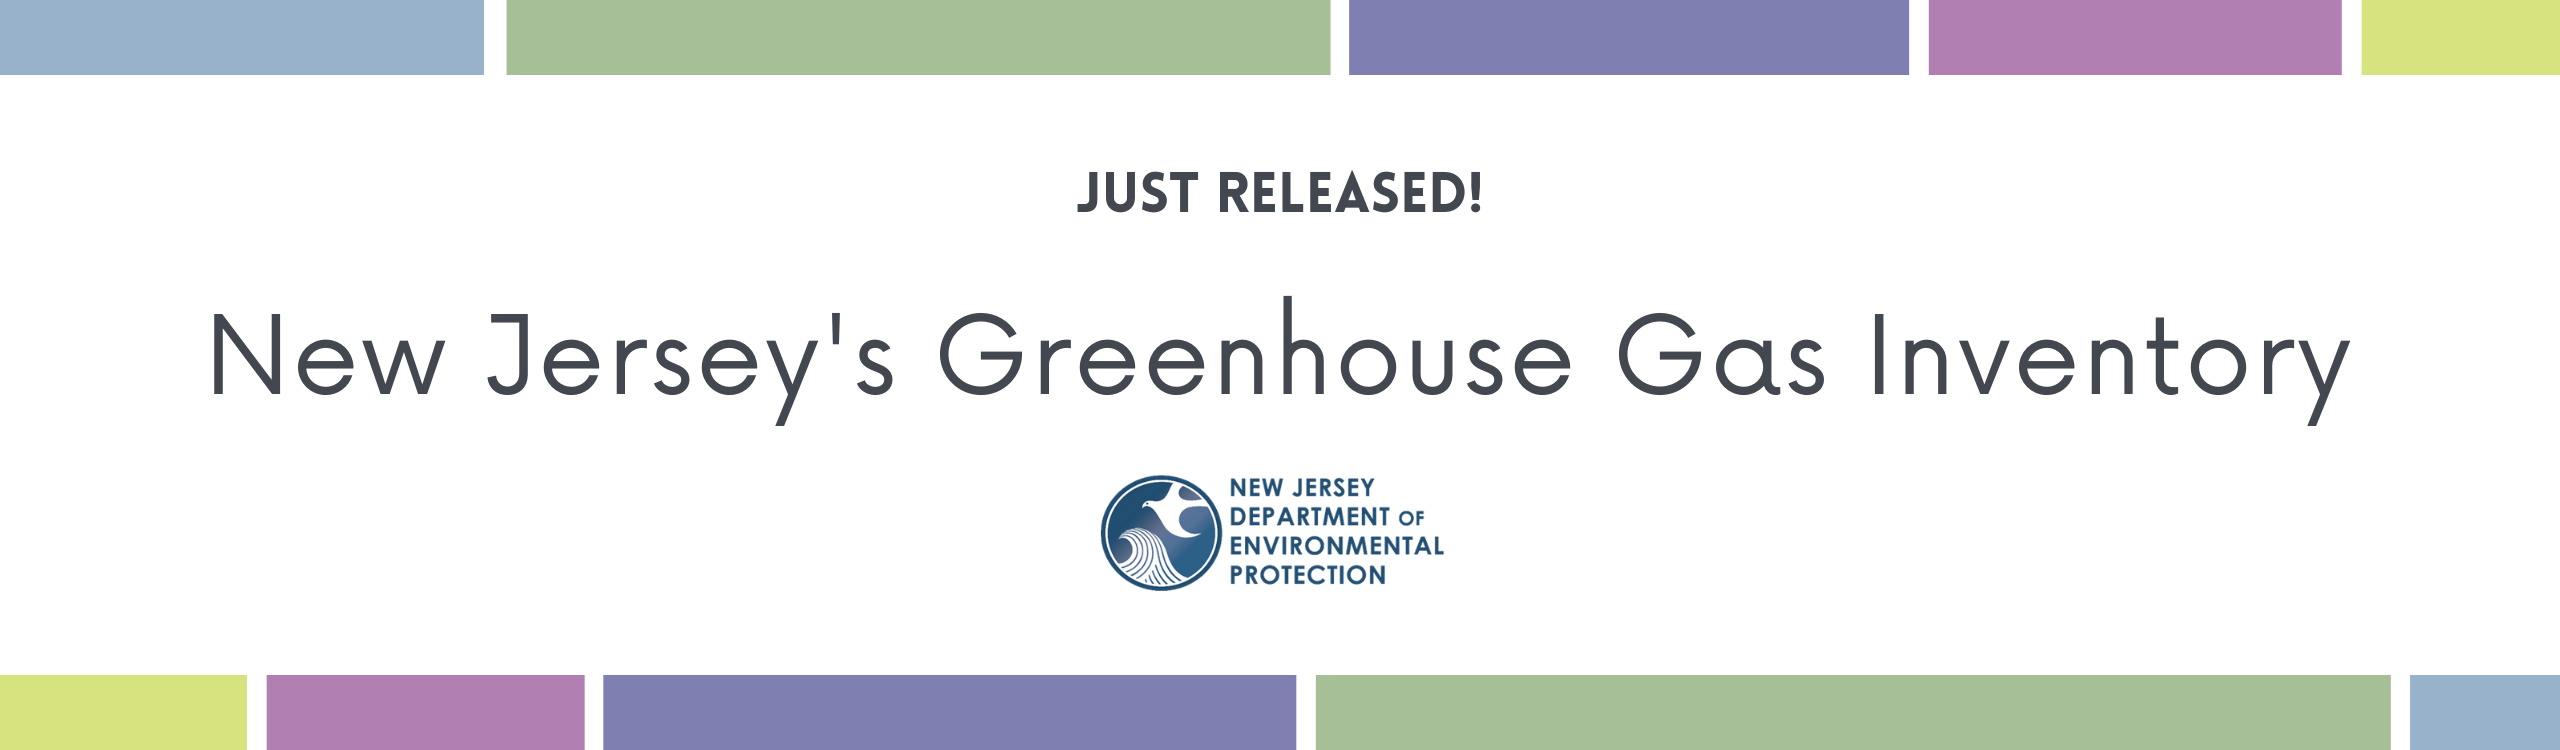 New Jersey's Greenhouse Gas Inventory